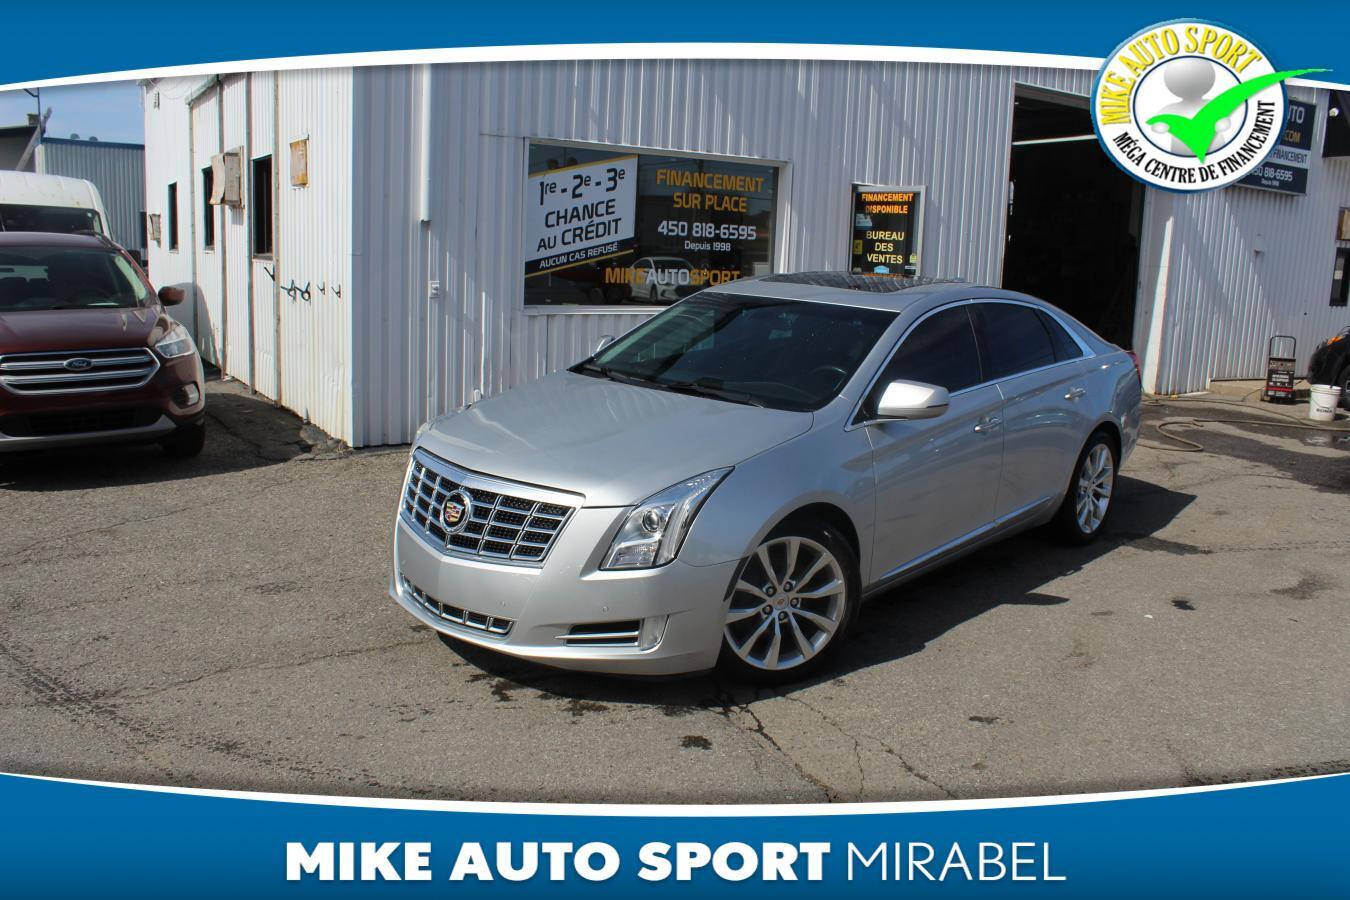 2015 Cadillac XTS Berline 4 portes Luxe, traction intégrale+ cuir